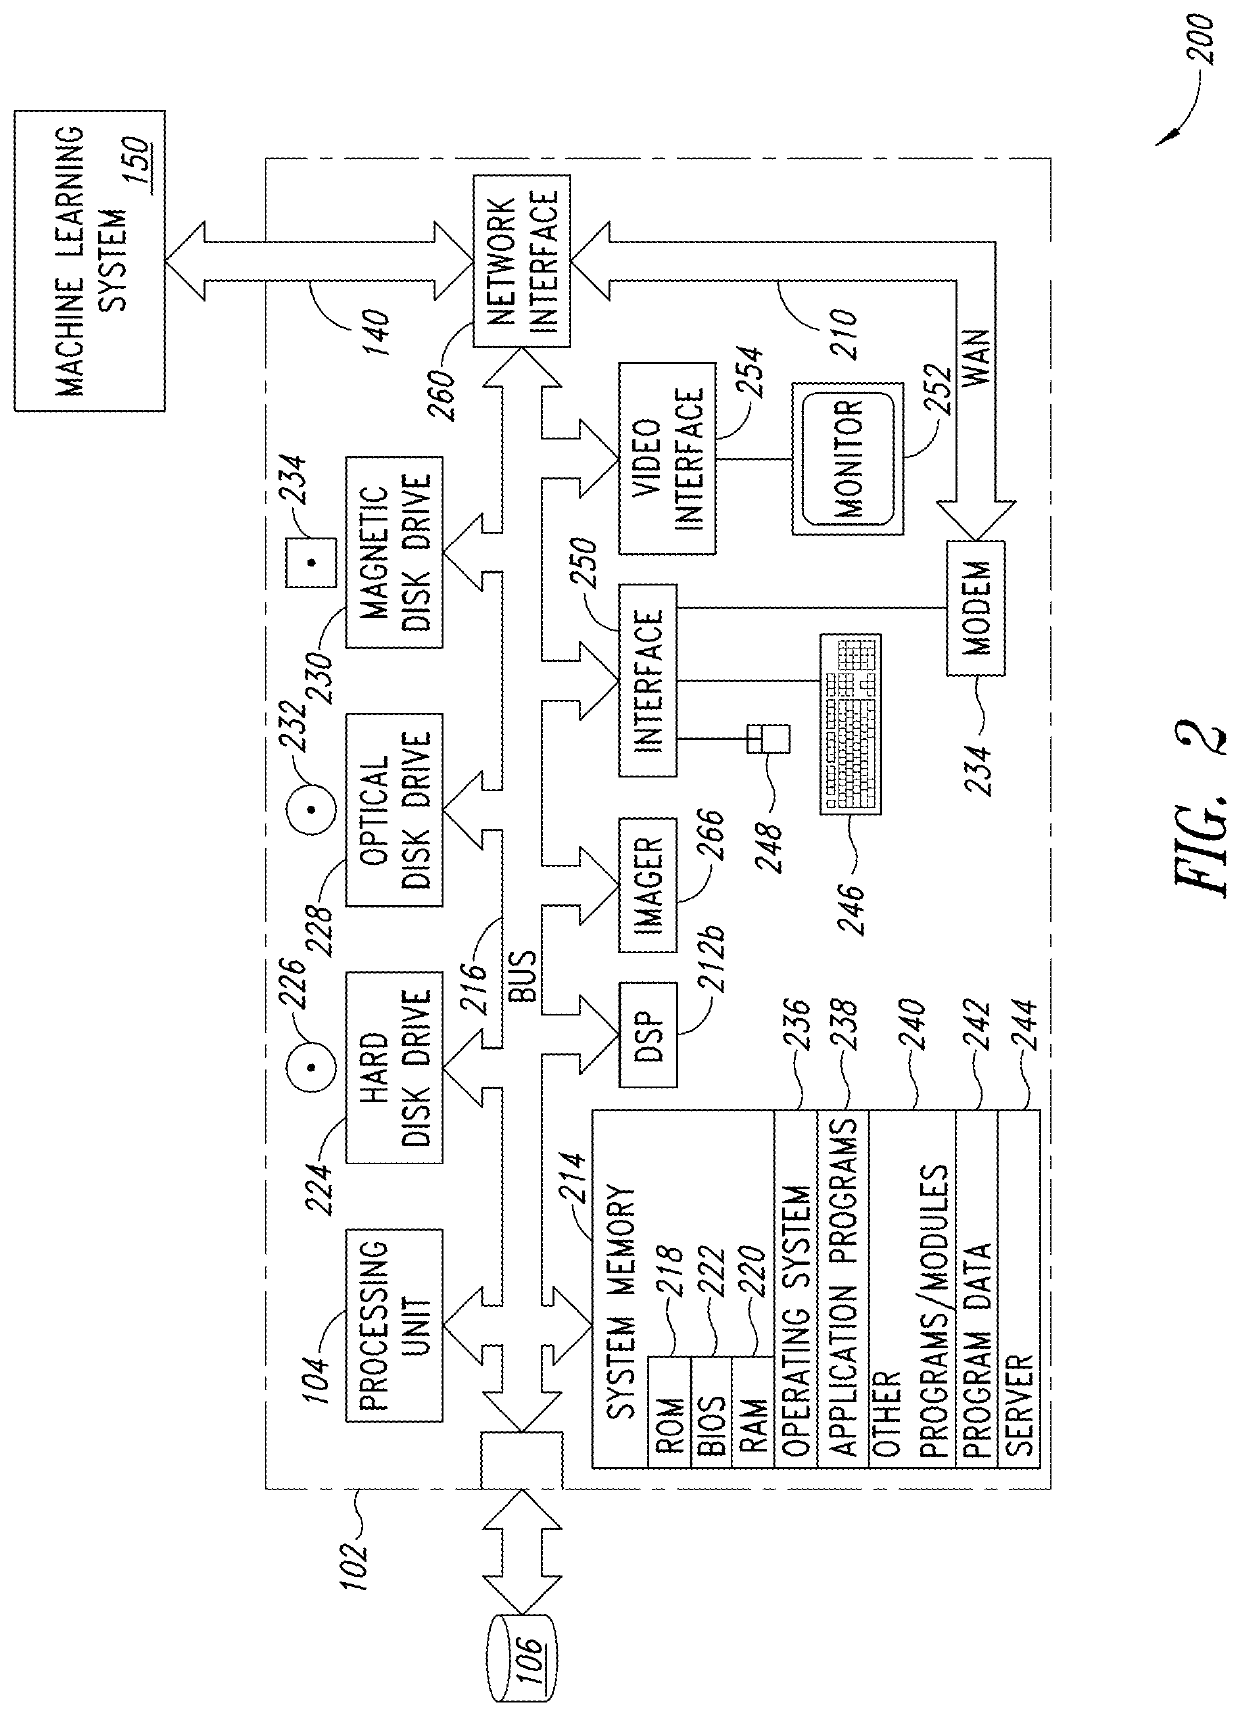 Apparatus, method and article to effect electronic message reply rate matching in a network environment